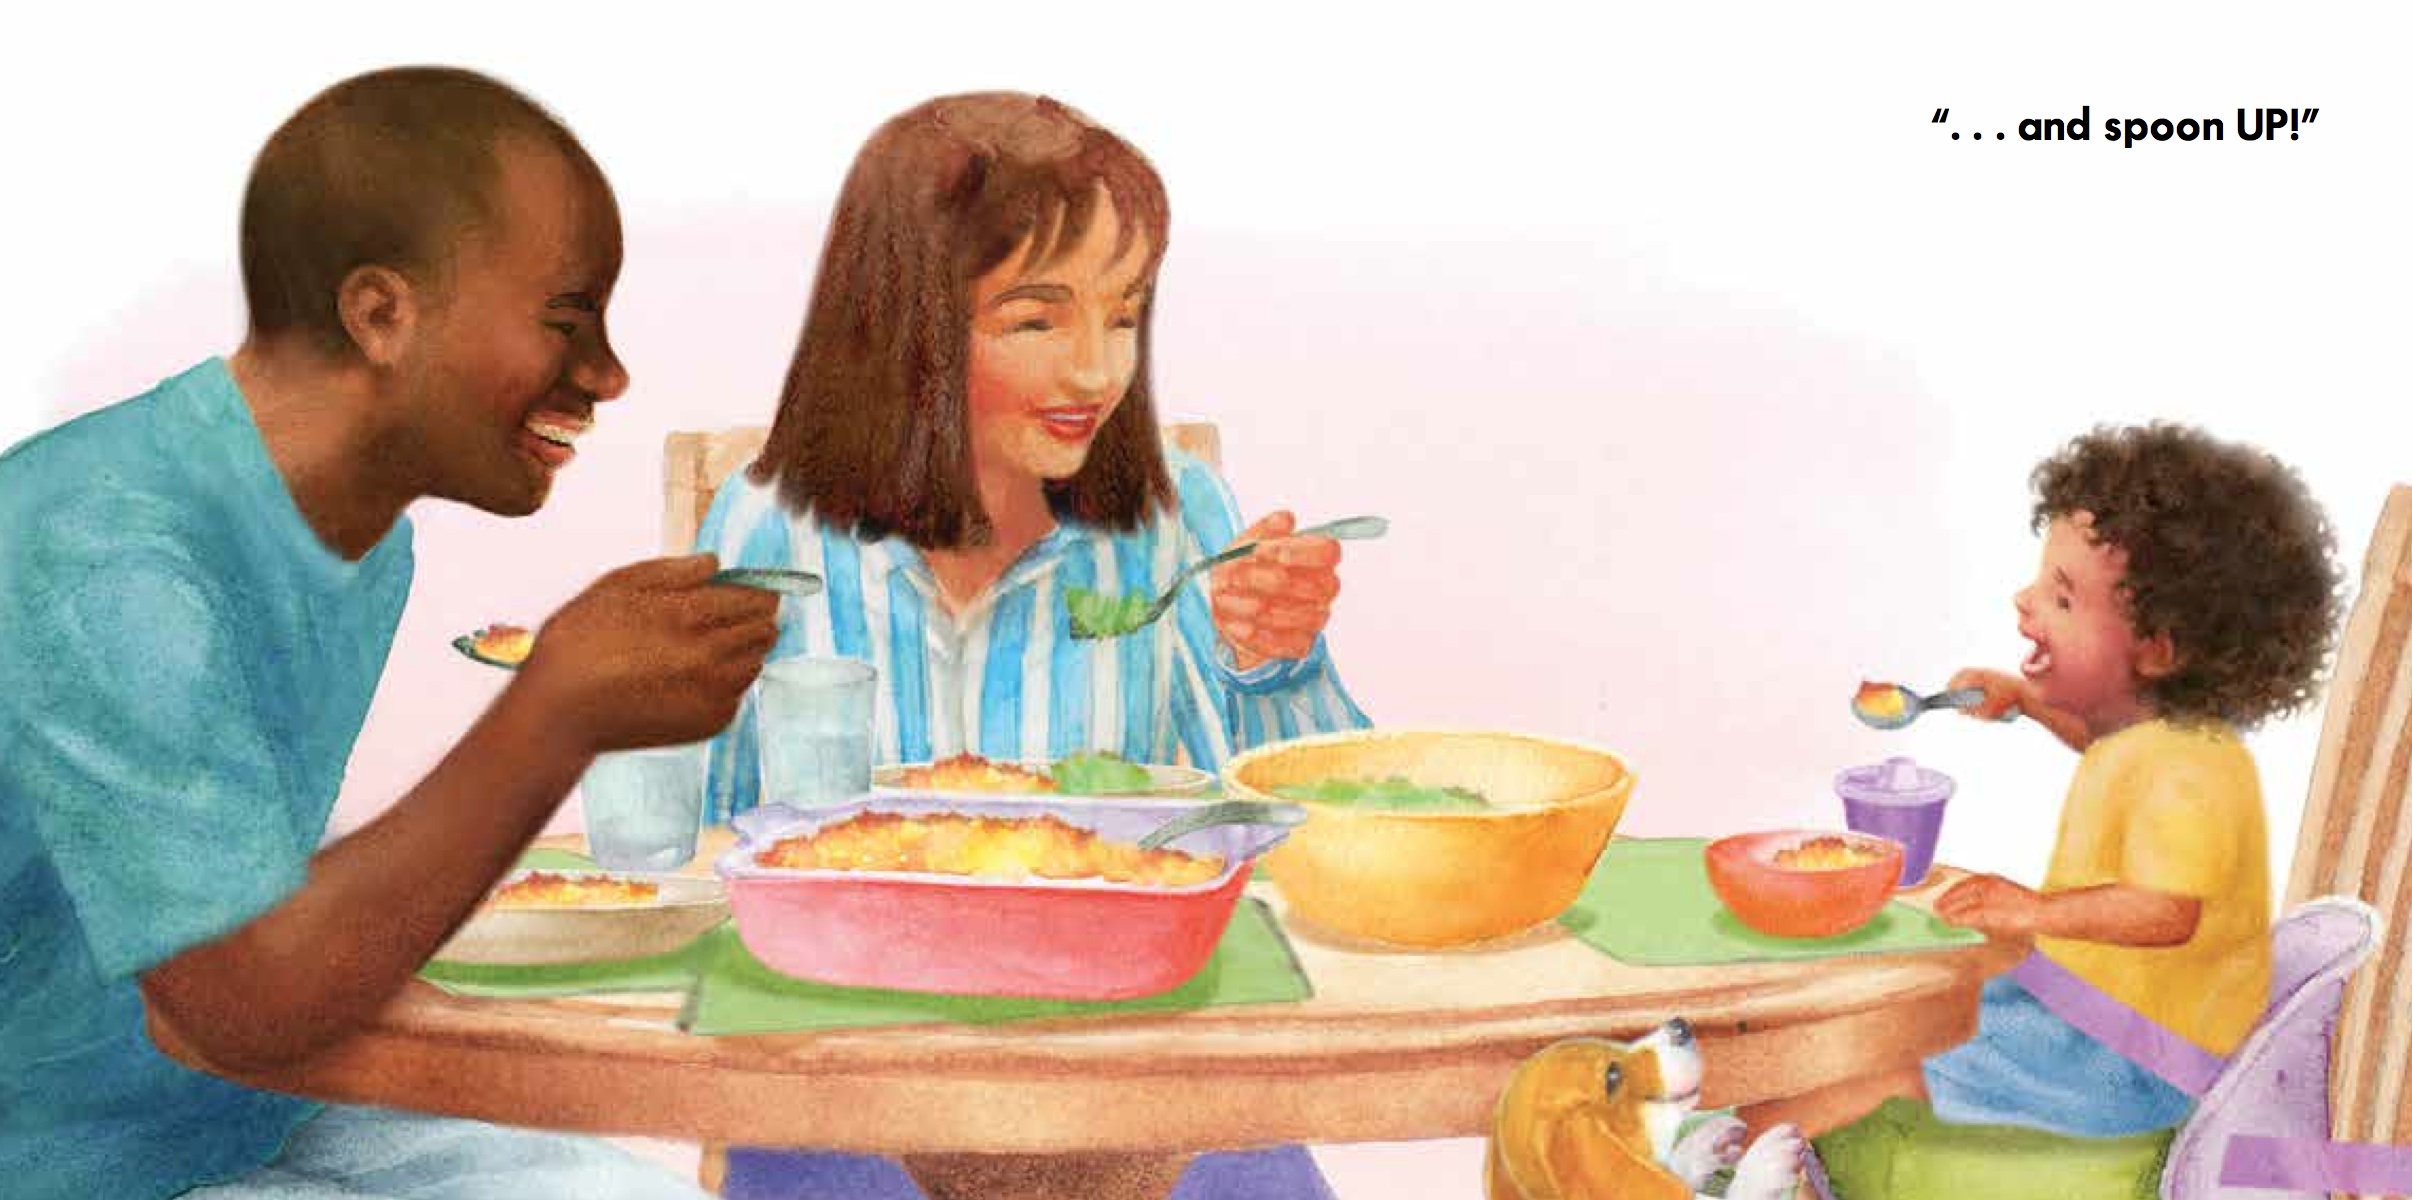 celebrate-picture-books-picture-book-review-clean-up-up-up-dinner